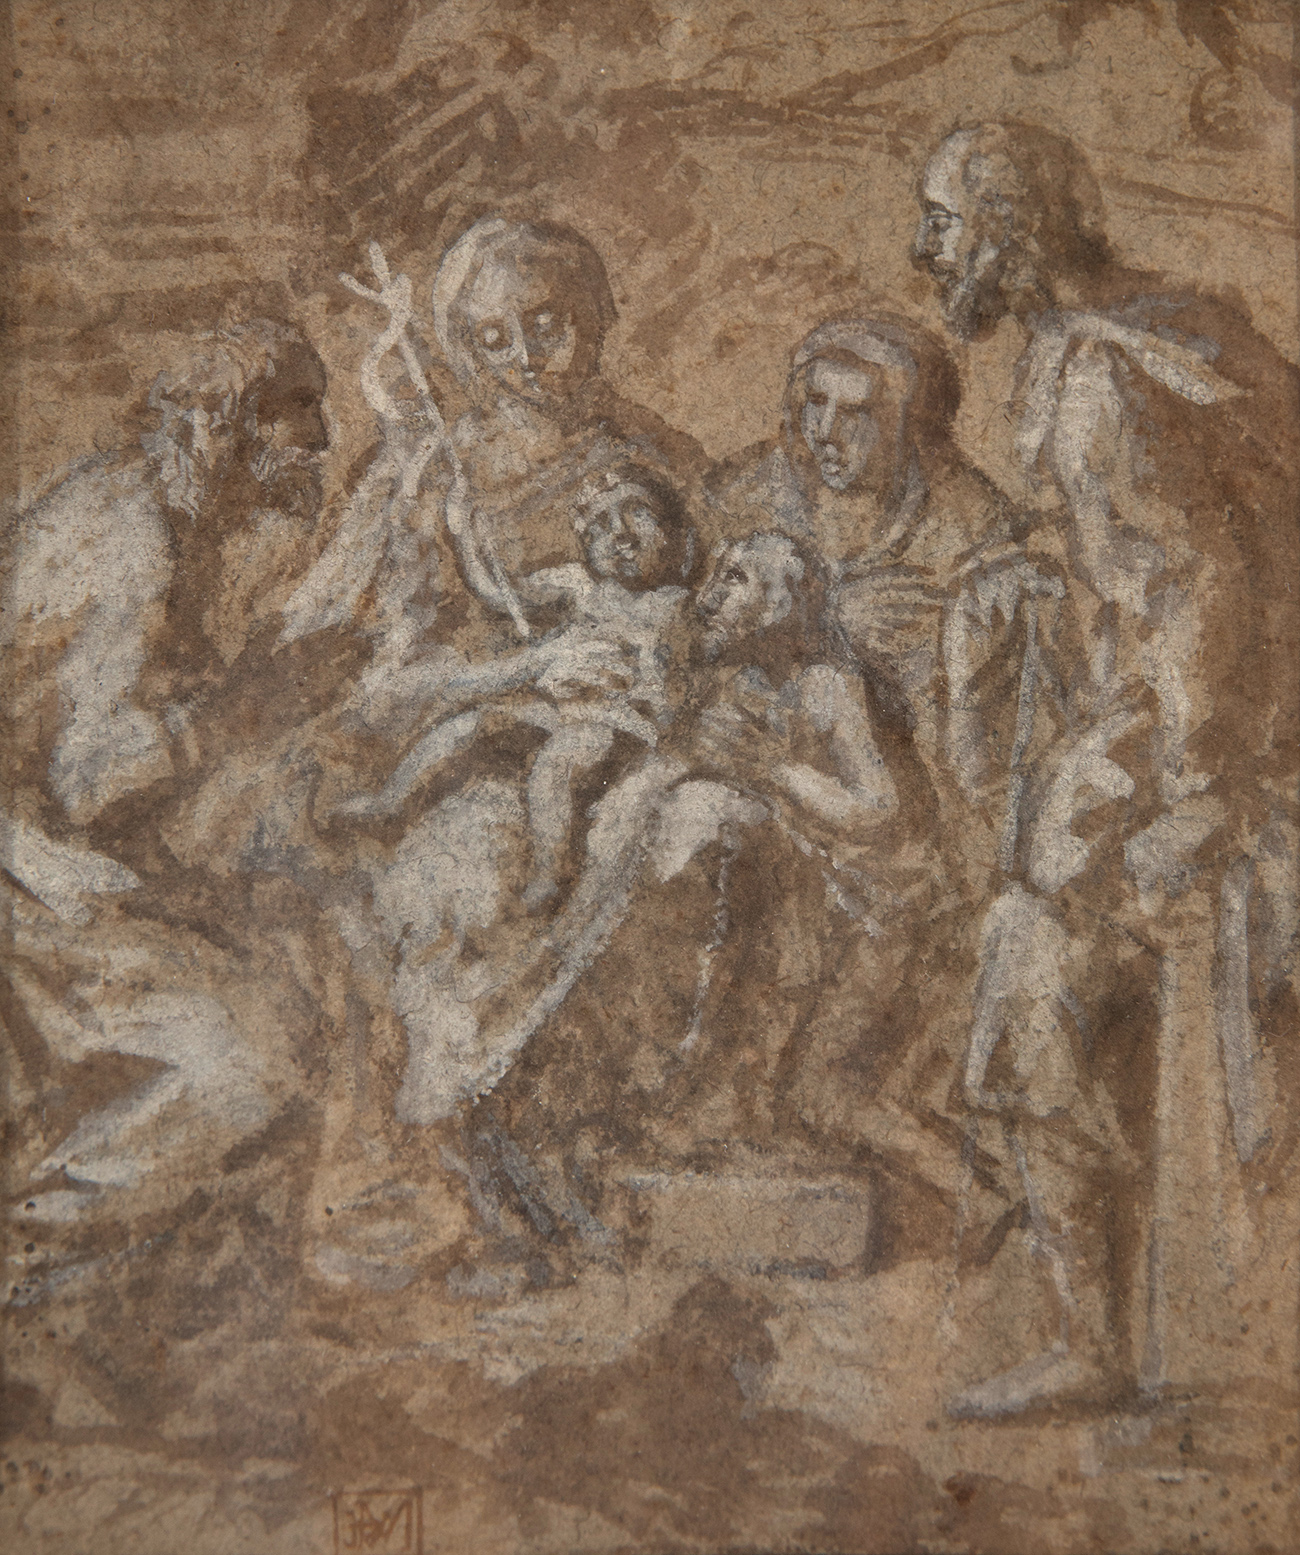 Italian school, 17th century."Adoration of the Shepherds,Ink and white lead on paper.Signed with